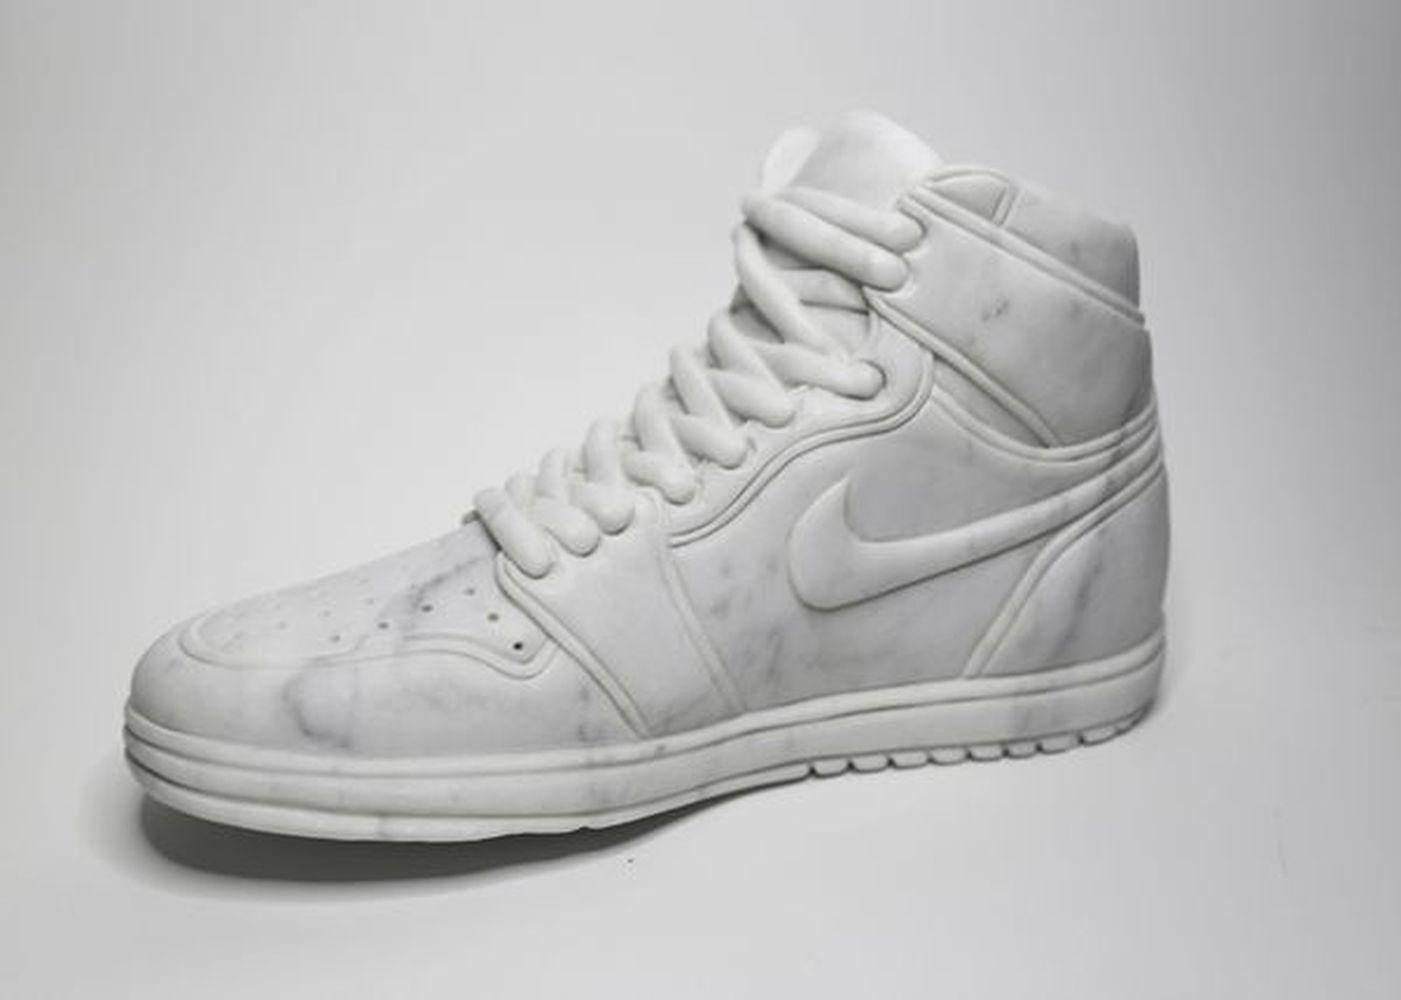 Frank Hollywood - White Marble Nike Shoes /Clothing and Fashion Sculpture /  "His Airness" For Sale at 1stDibs | nike shoe sculpture, nike marble shoes,  airness shoes